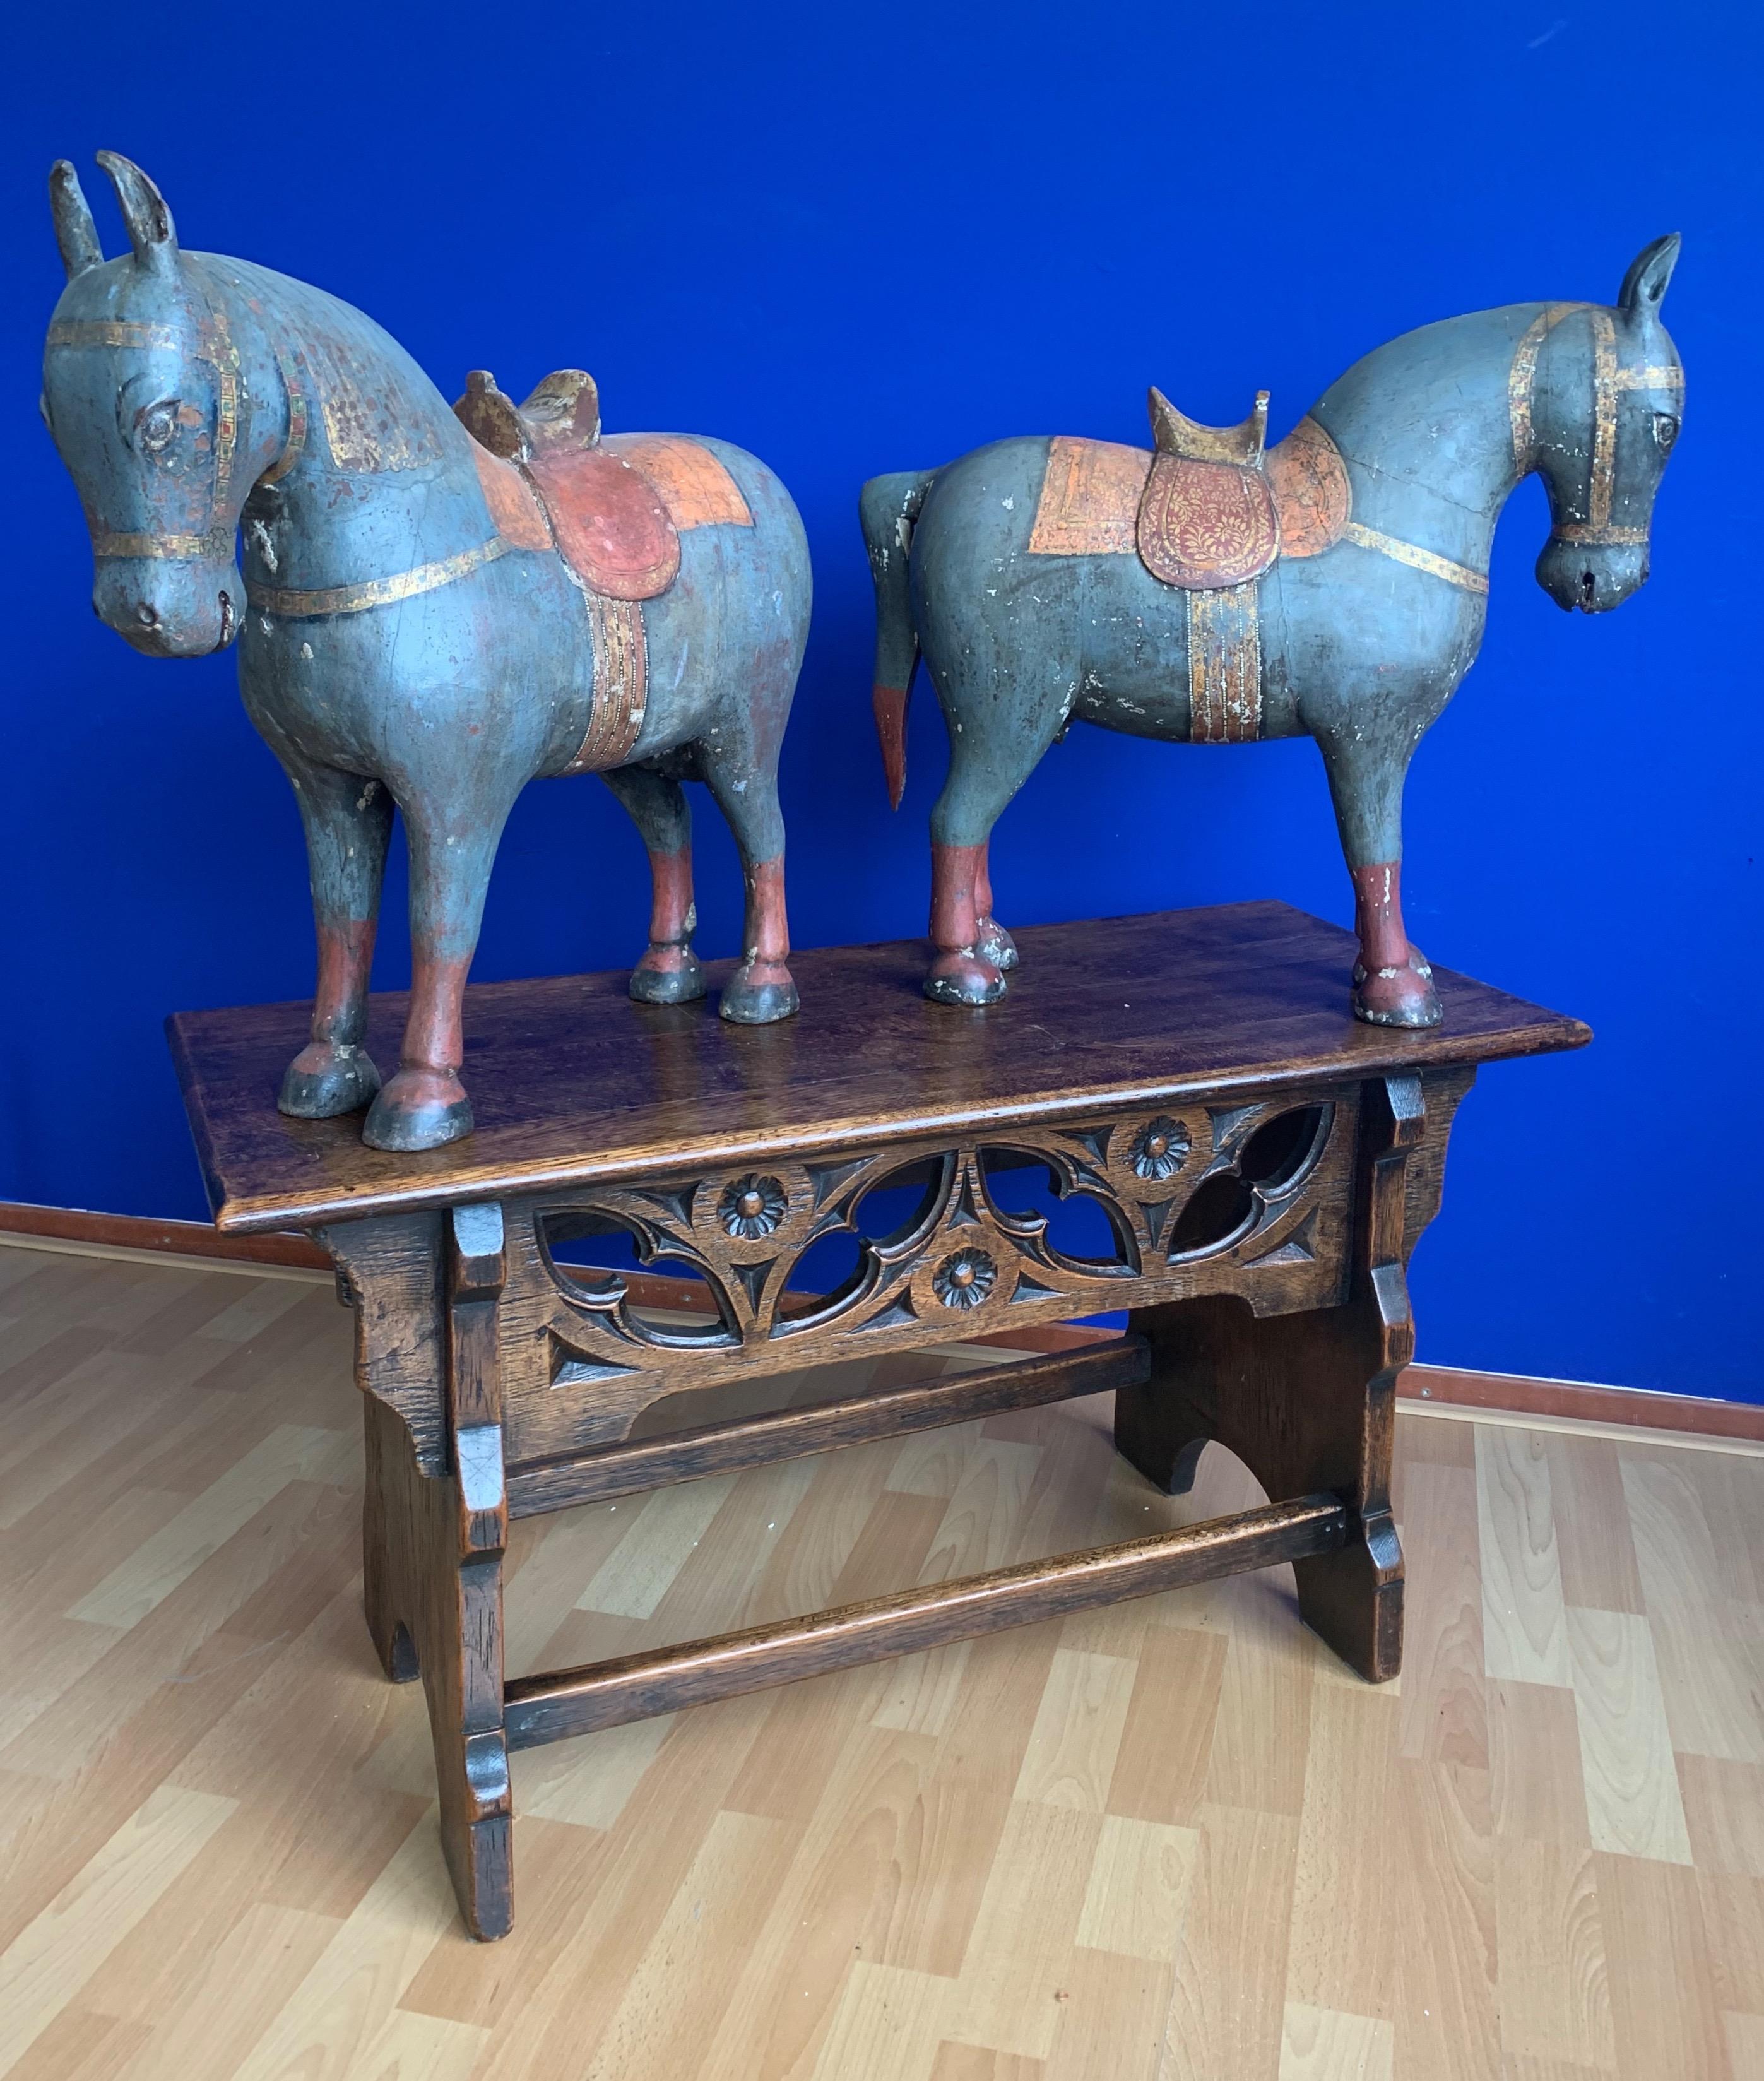 Stunning and unique pair of matching horse sculptures.

With a combined experience of almost 30 years in the antiques trade, we were thrilled to once again find beautifully hand-crafted and decorative antiques that we had never seen before. From